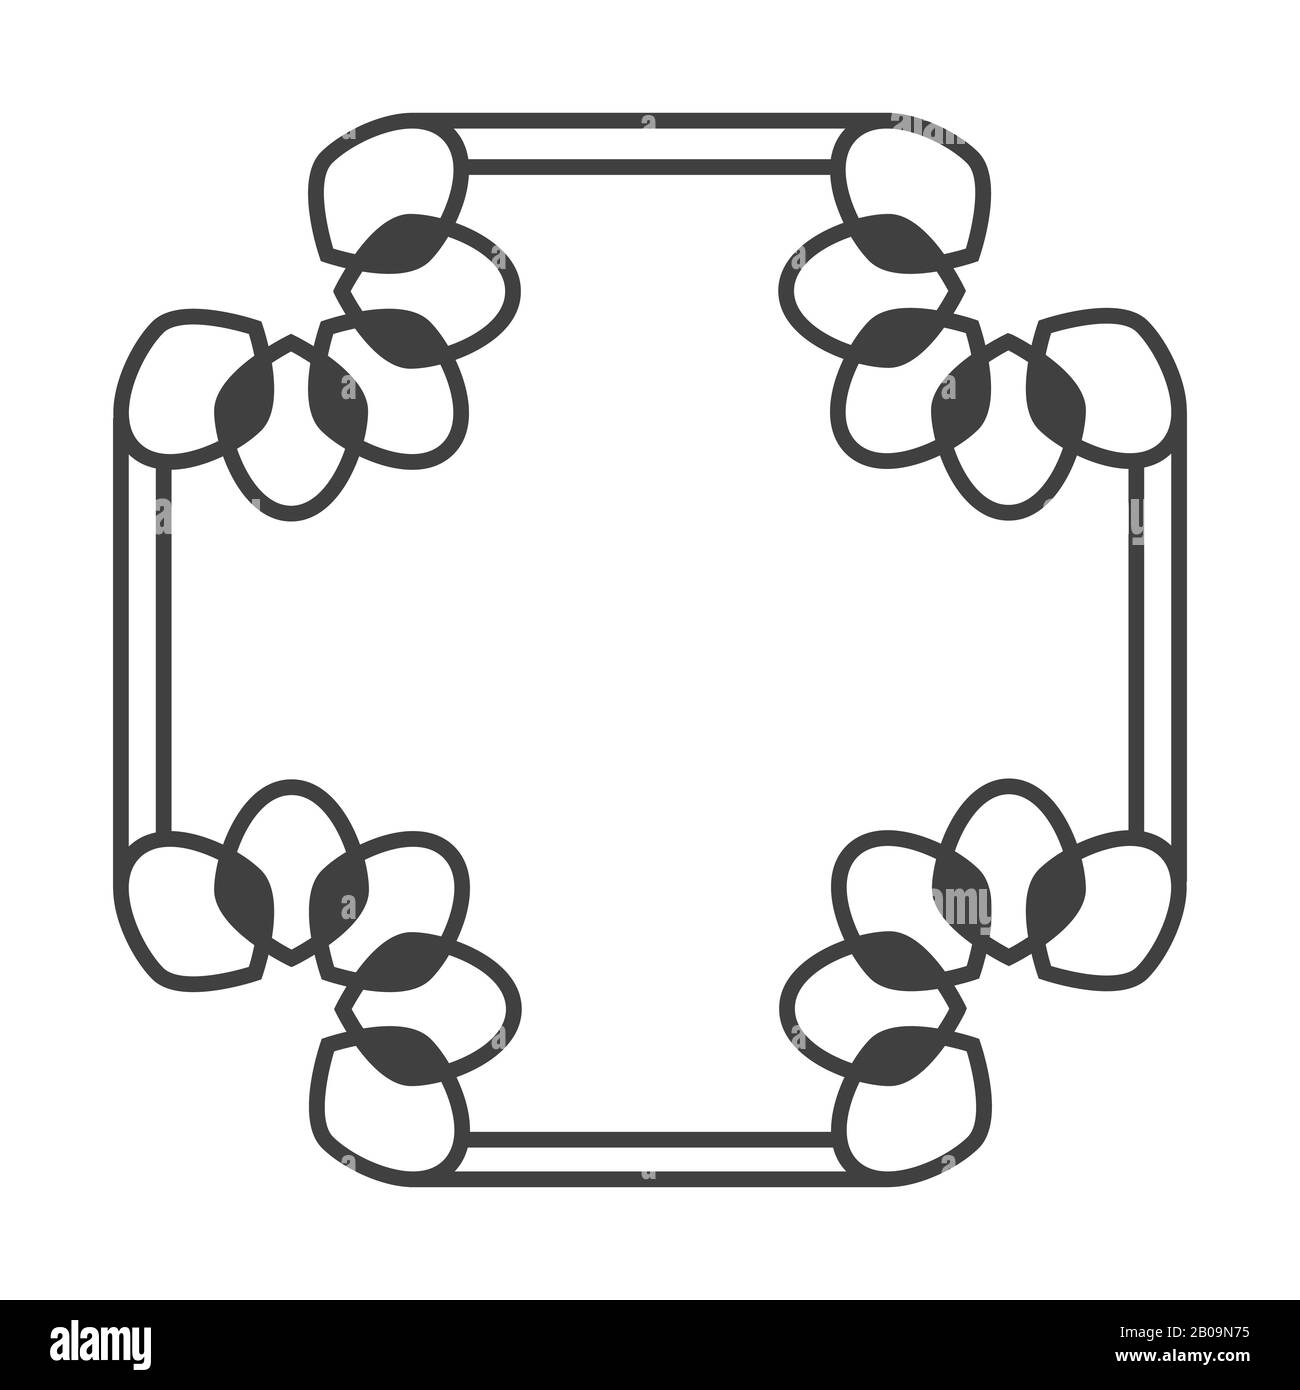 Square asian vector retro frame in black and white with floral elements illustration Stock Vector